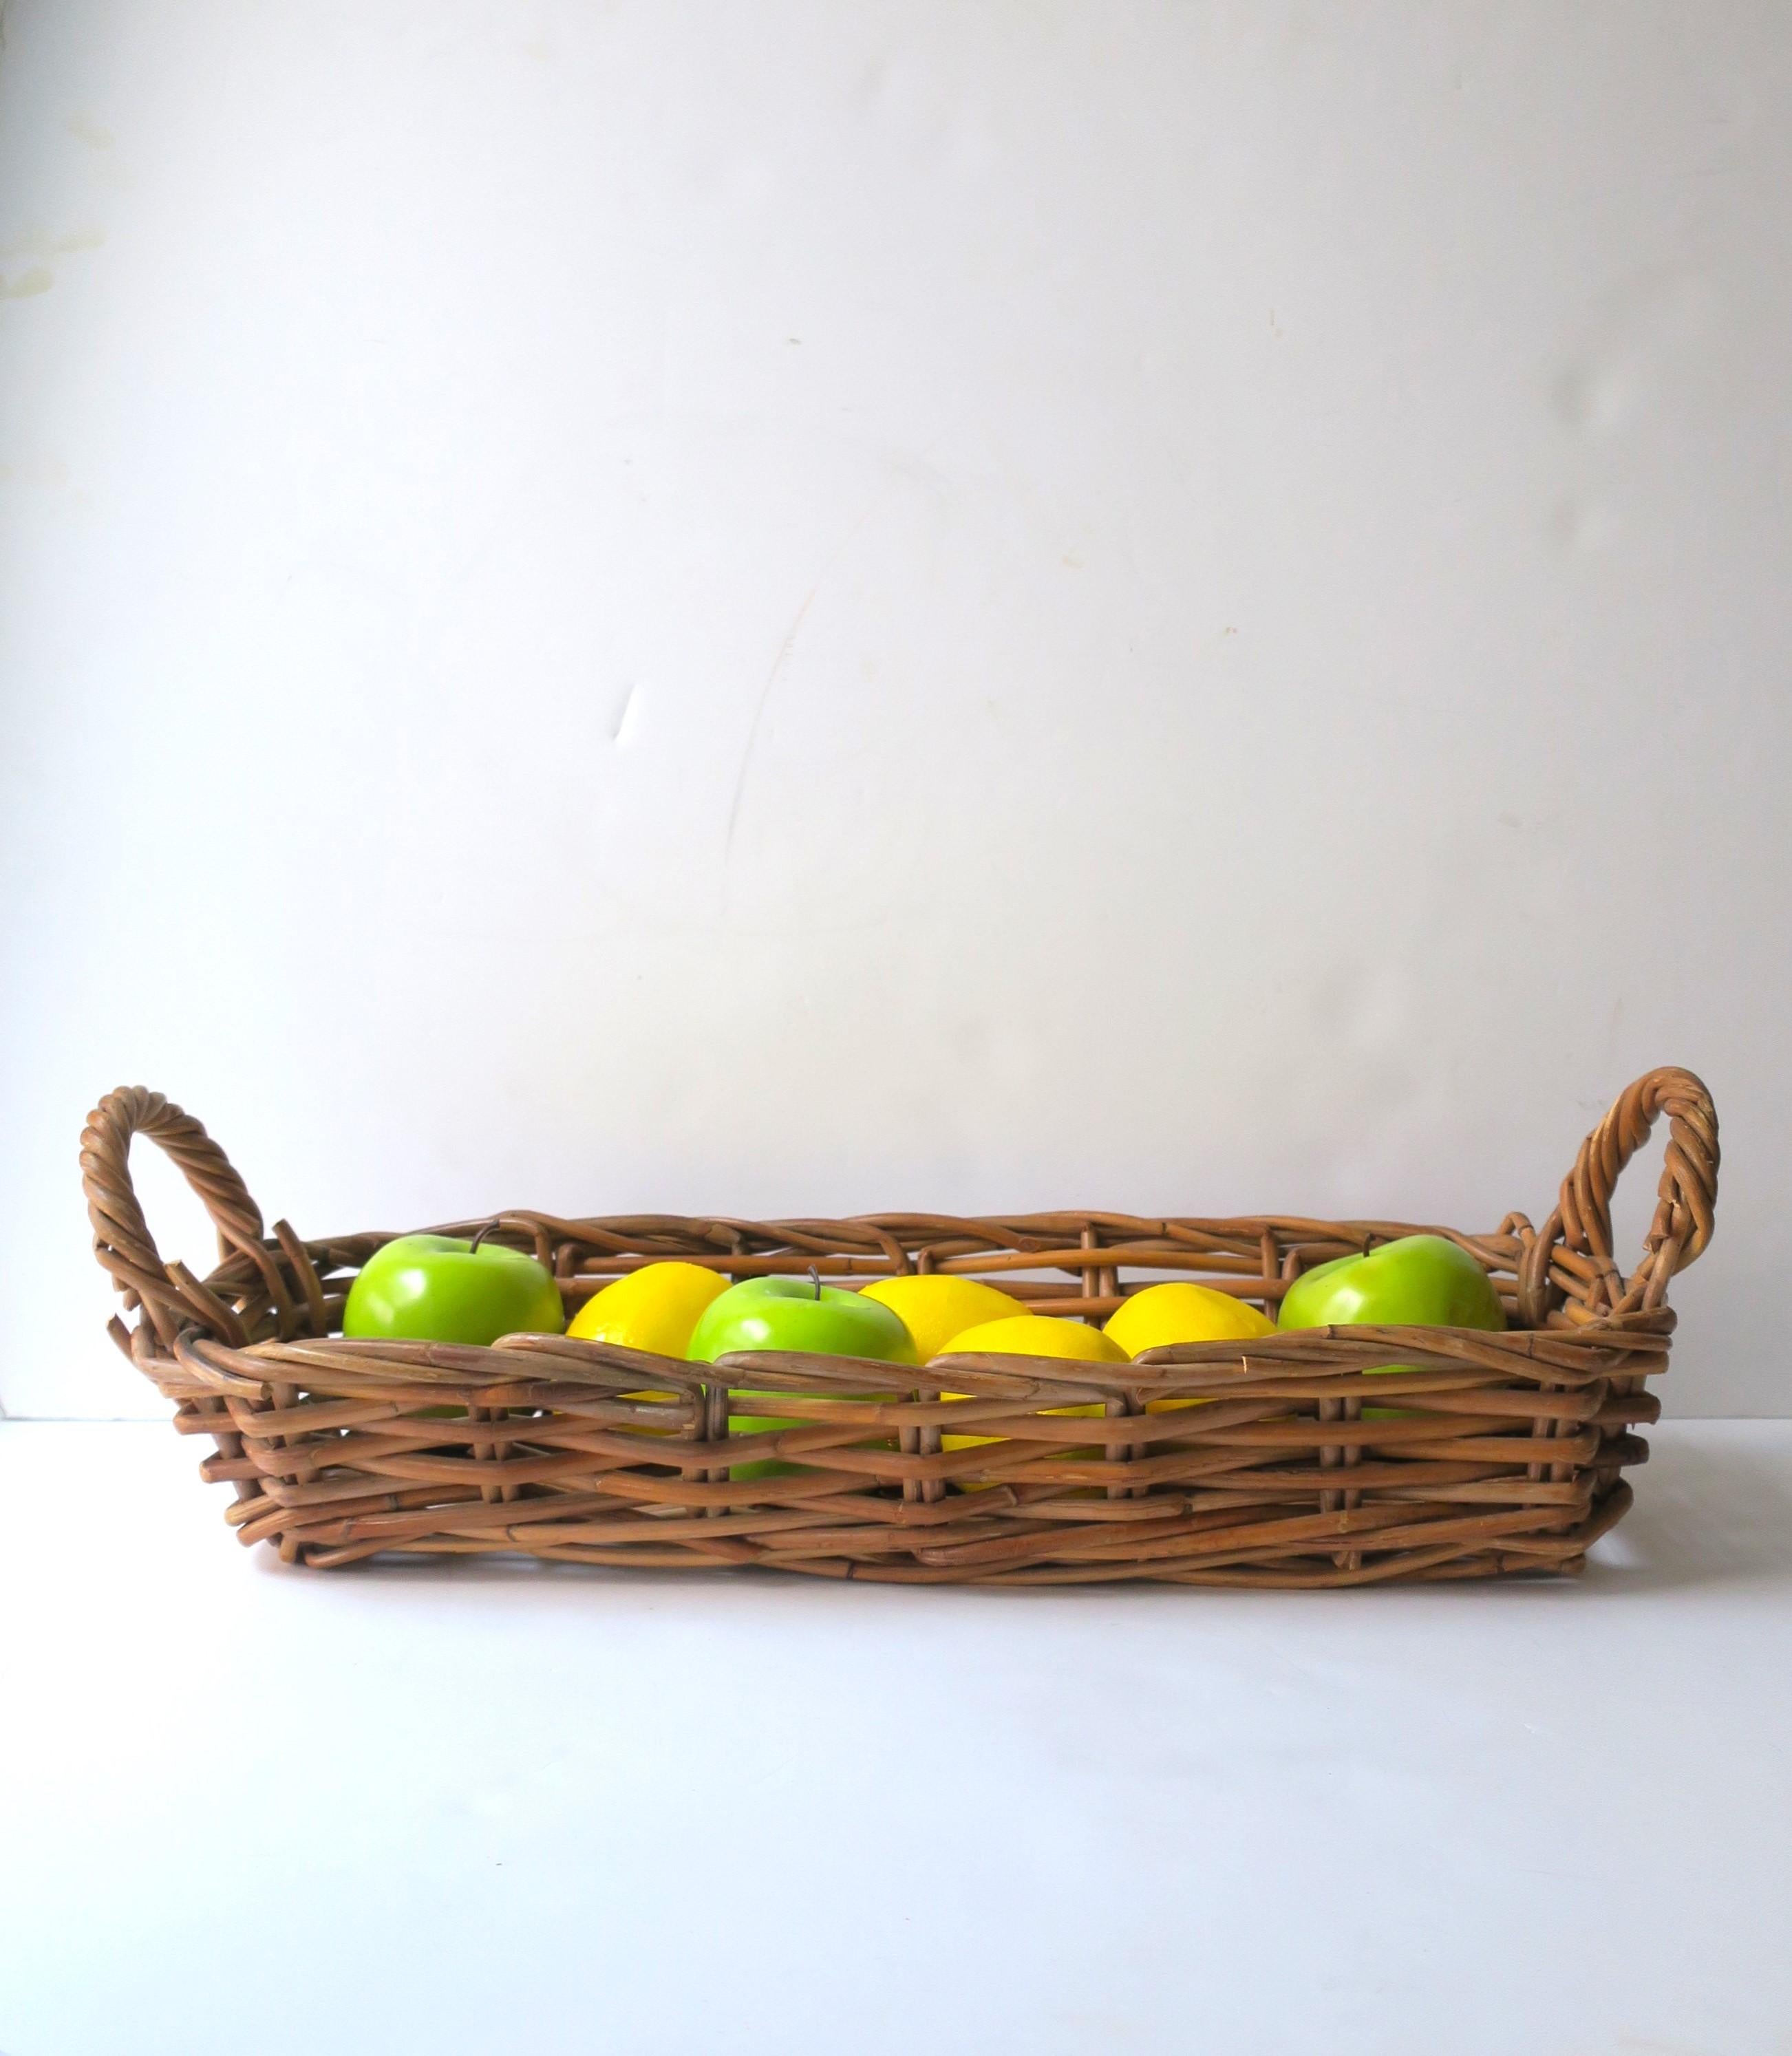 A wicker basket, oblong, with double handles, circa mid-20th century, USA. A great piece to hold or display items such a fruit (as demonstrated), vegetables, as a breadbasket, to hold plants/flowers, etc. Many uses. Dimensions: 8